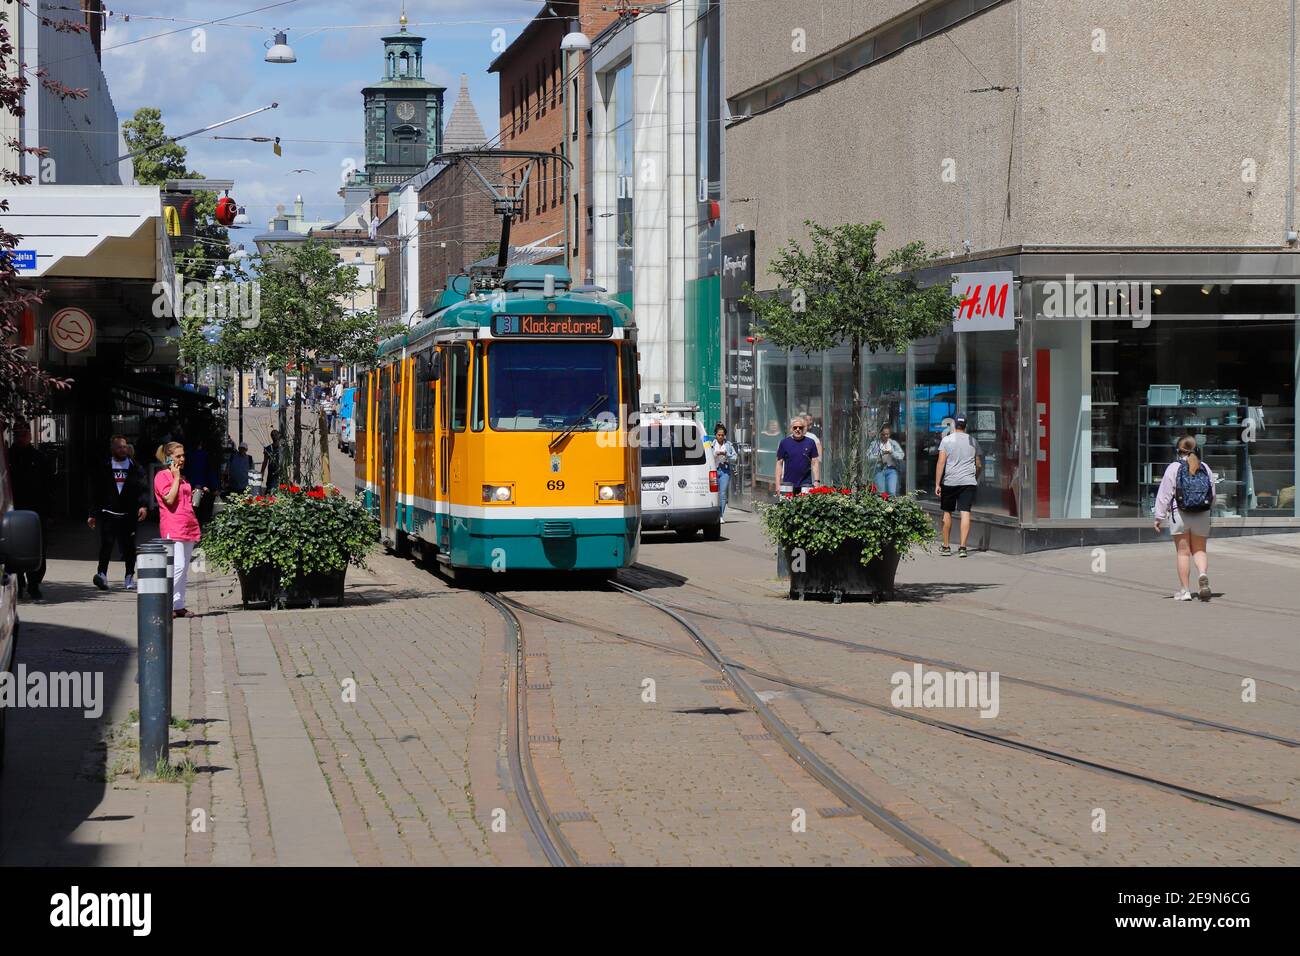 Norrkoping, Sweden - July 3, 2020: Yellow tram at the Drottninggatan street in service on line 3 with destination Klockartorpet. Stock Photo